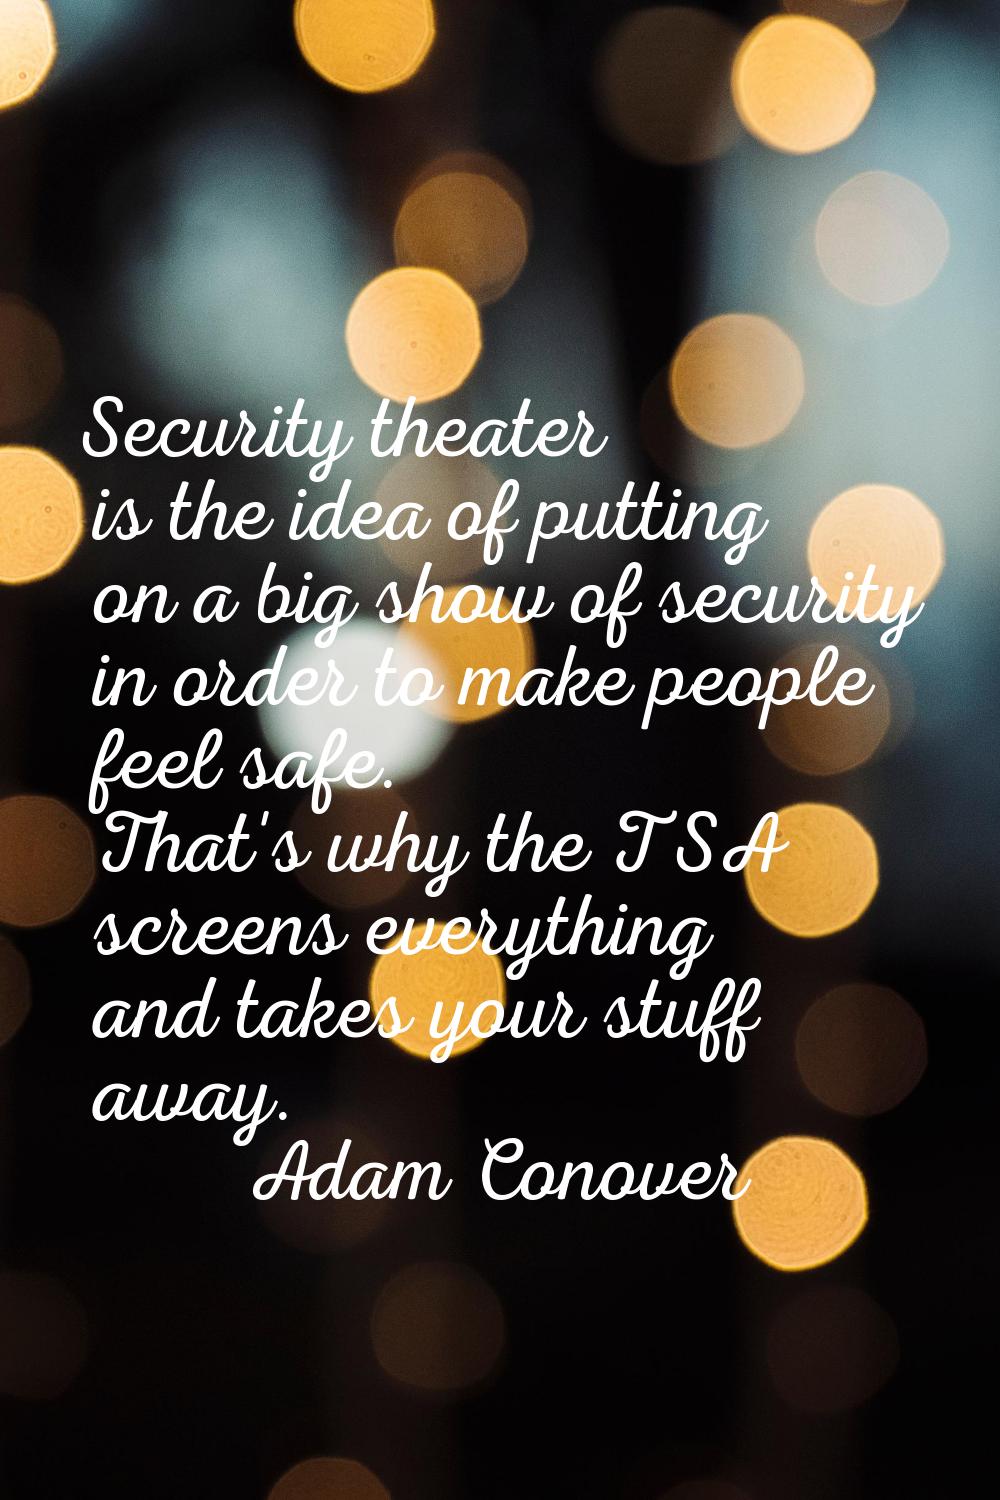 Security theater is the idea of putting on a big show of security in order to make people feel safe